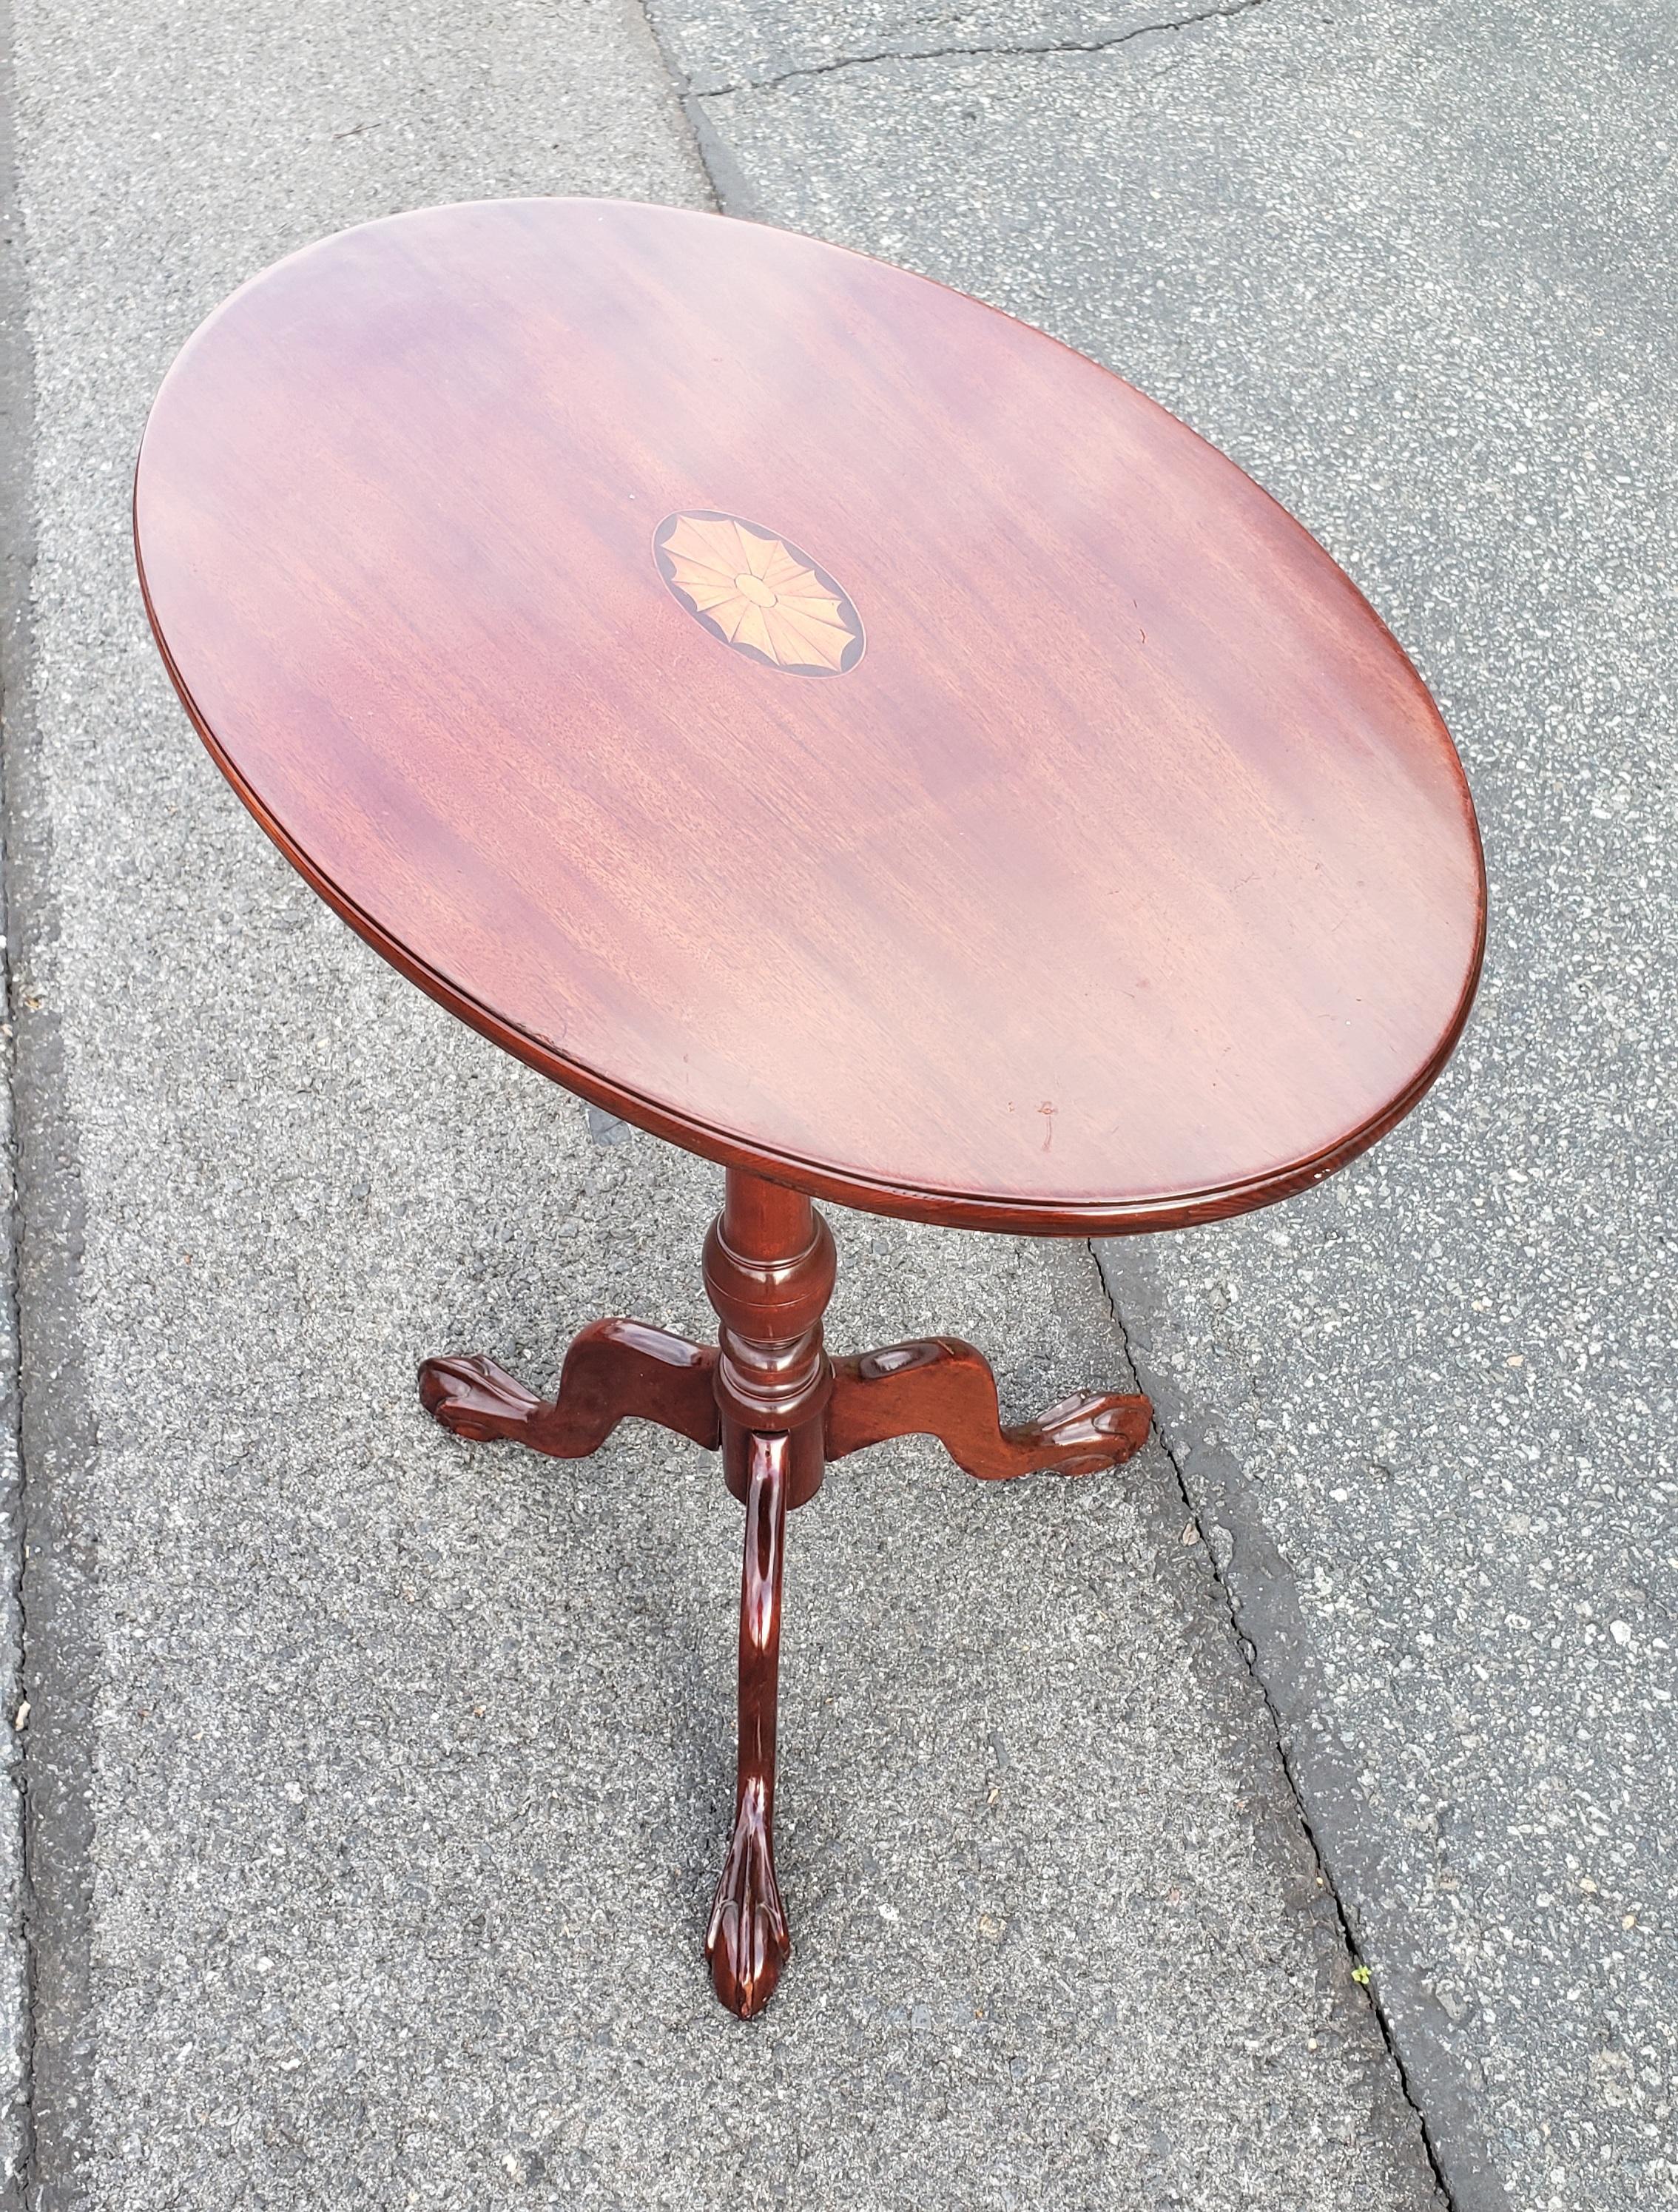 Mahogany Inlaid Tilt-Top Tea Table Side Table with Tripod claw Feet in very good vintage condition.
Table measures 26.5